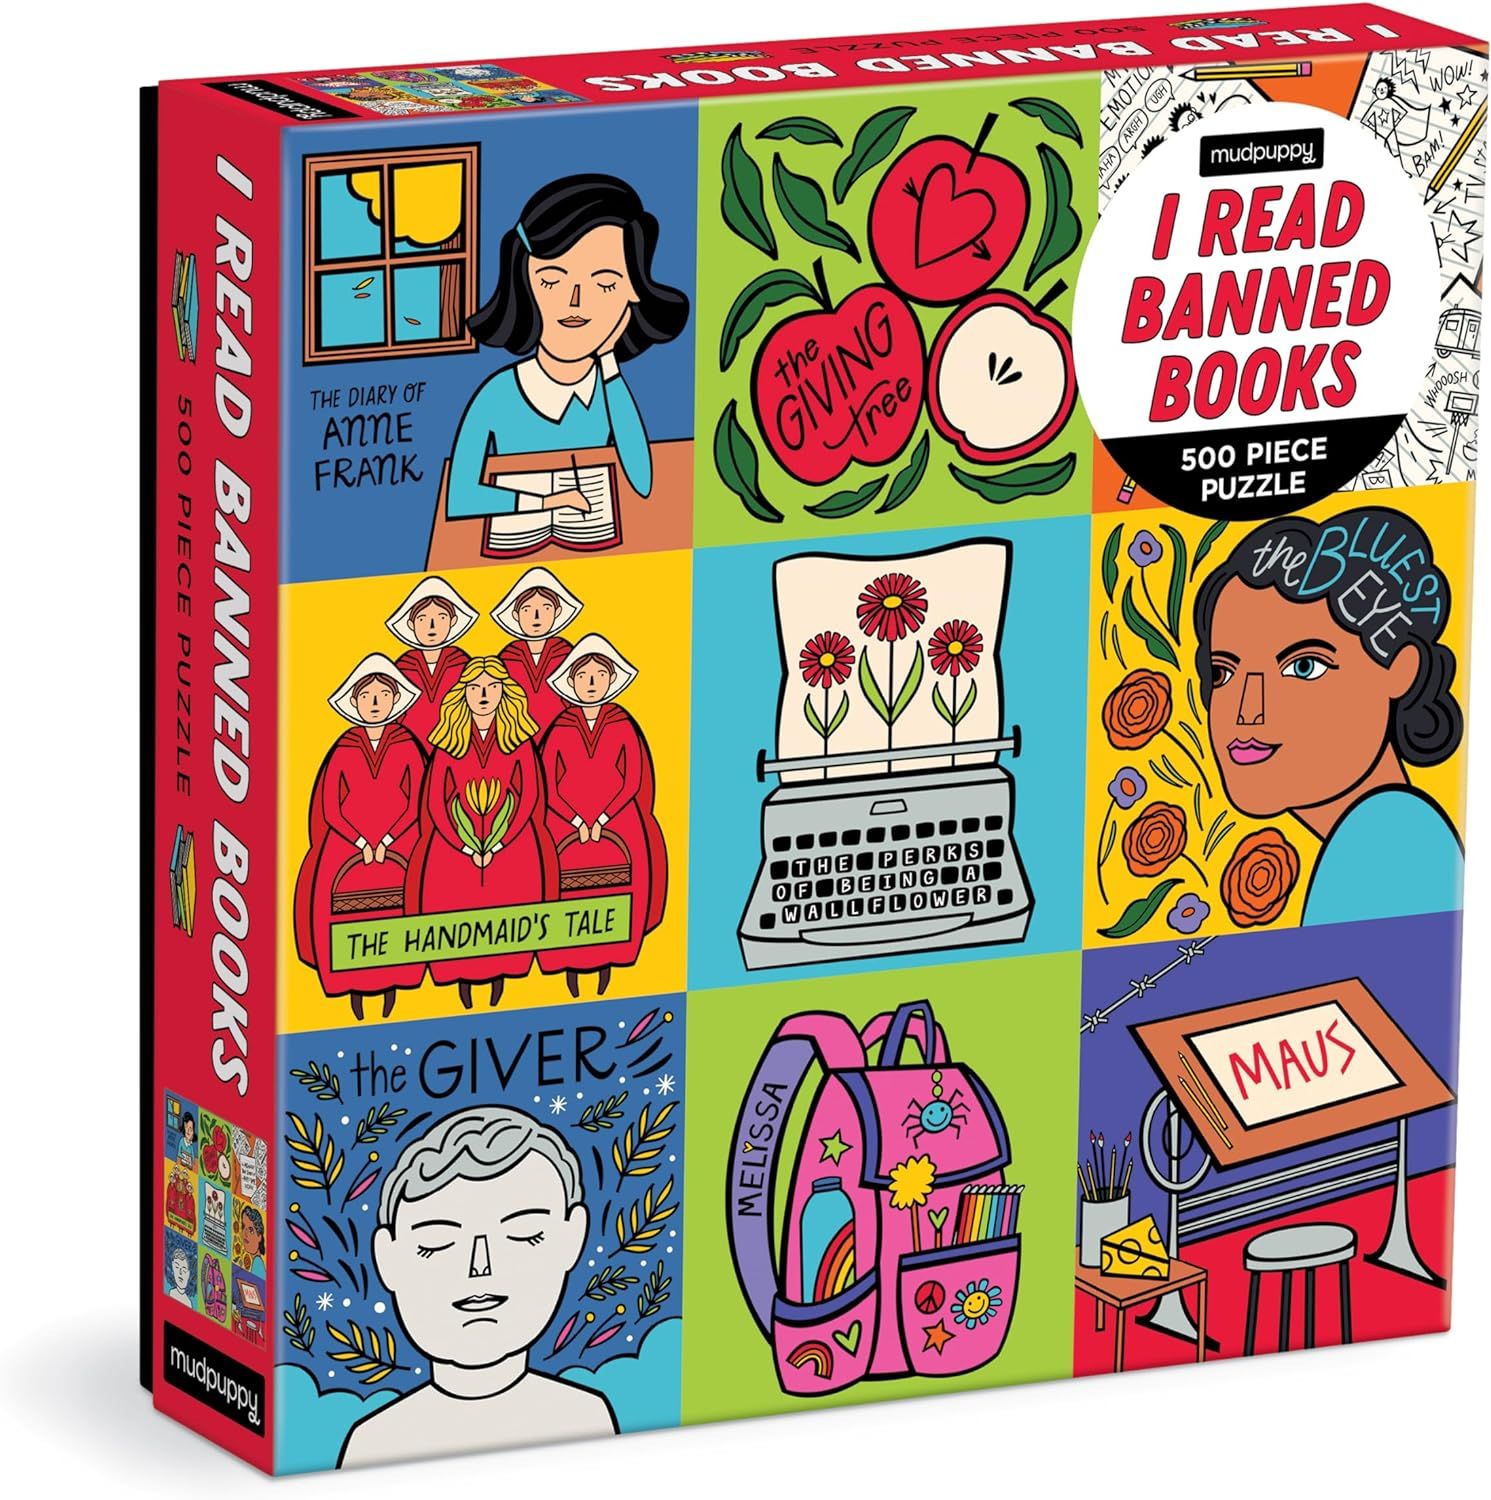 Image of a puzzle featuring 9 different banned books images